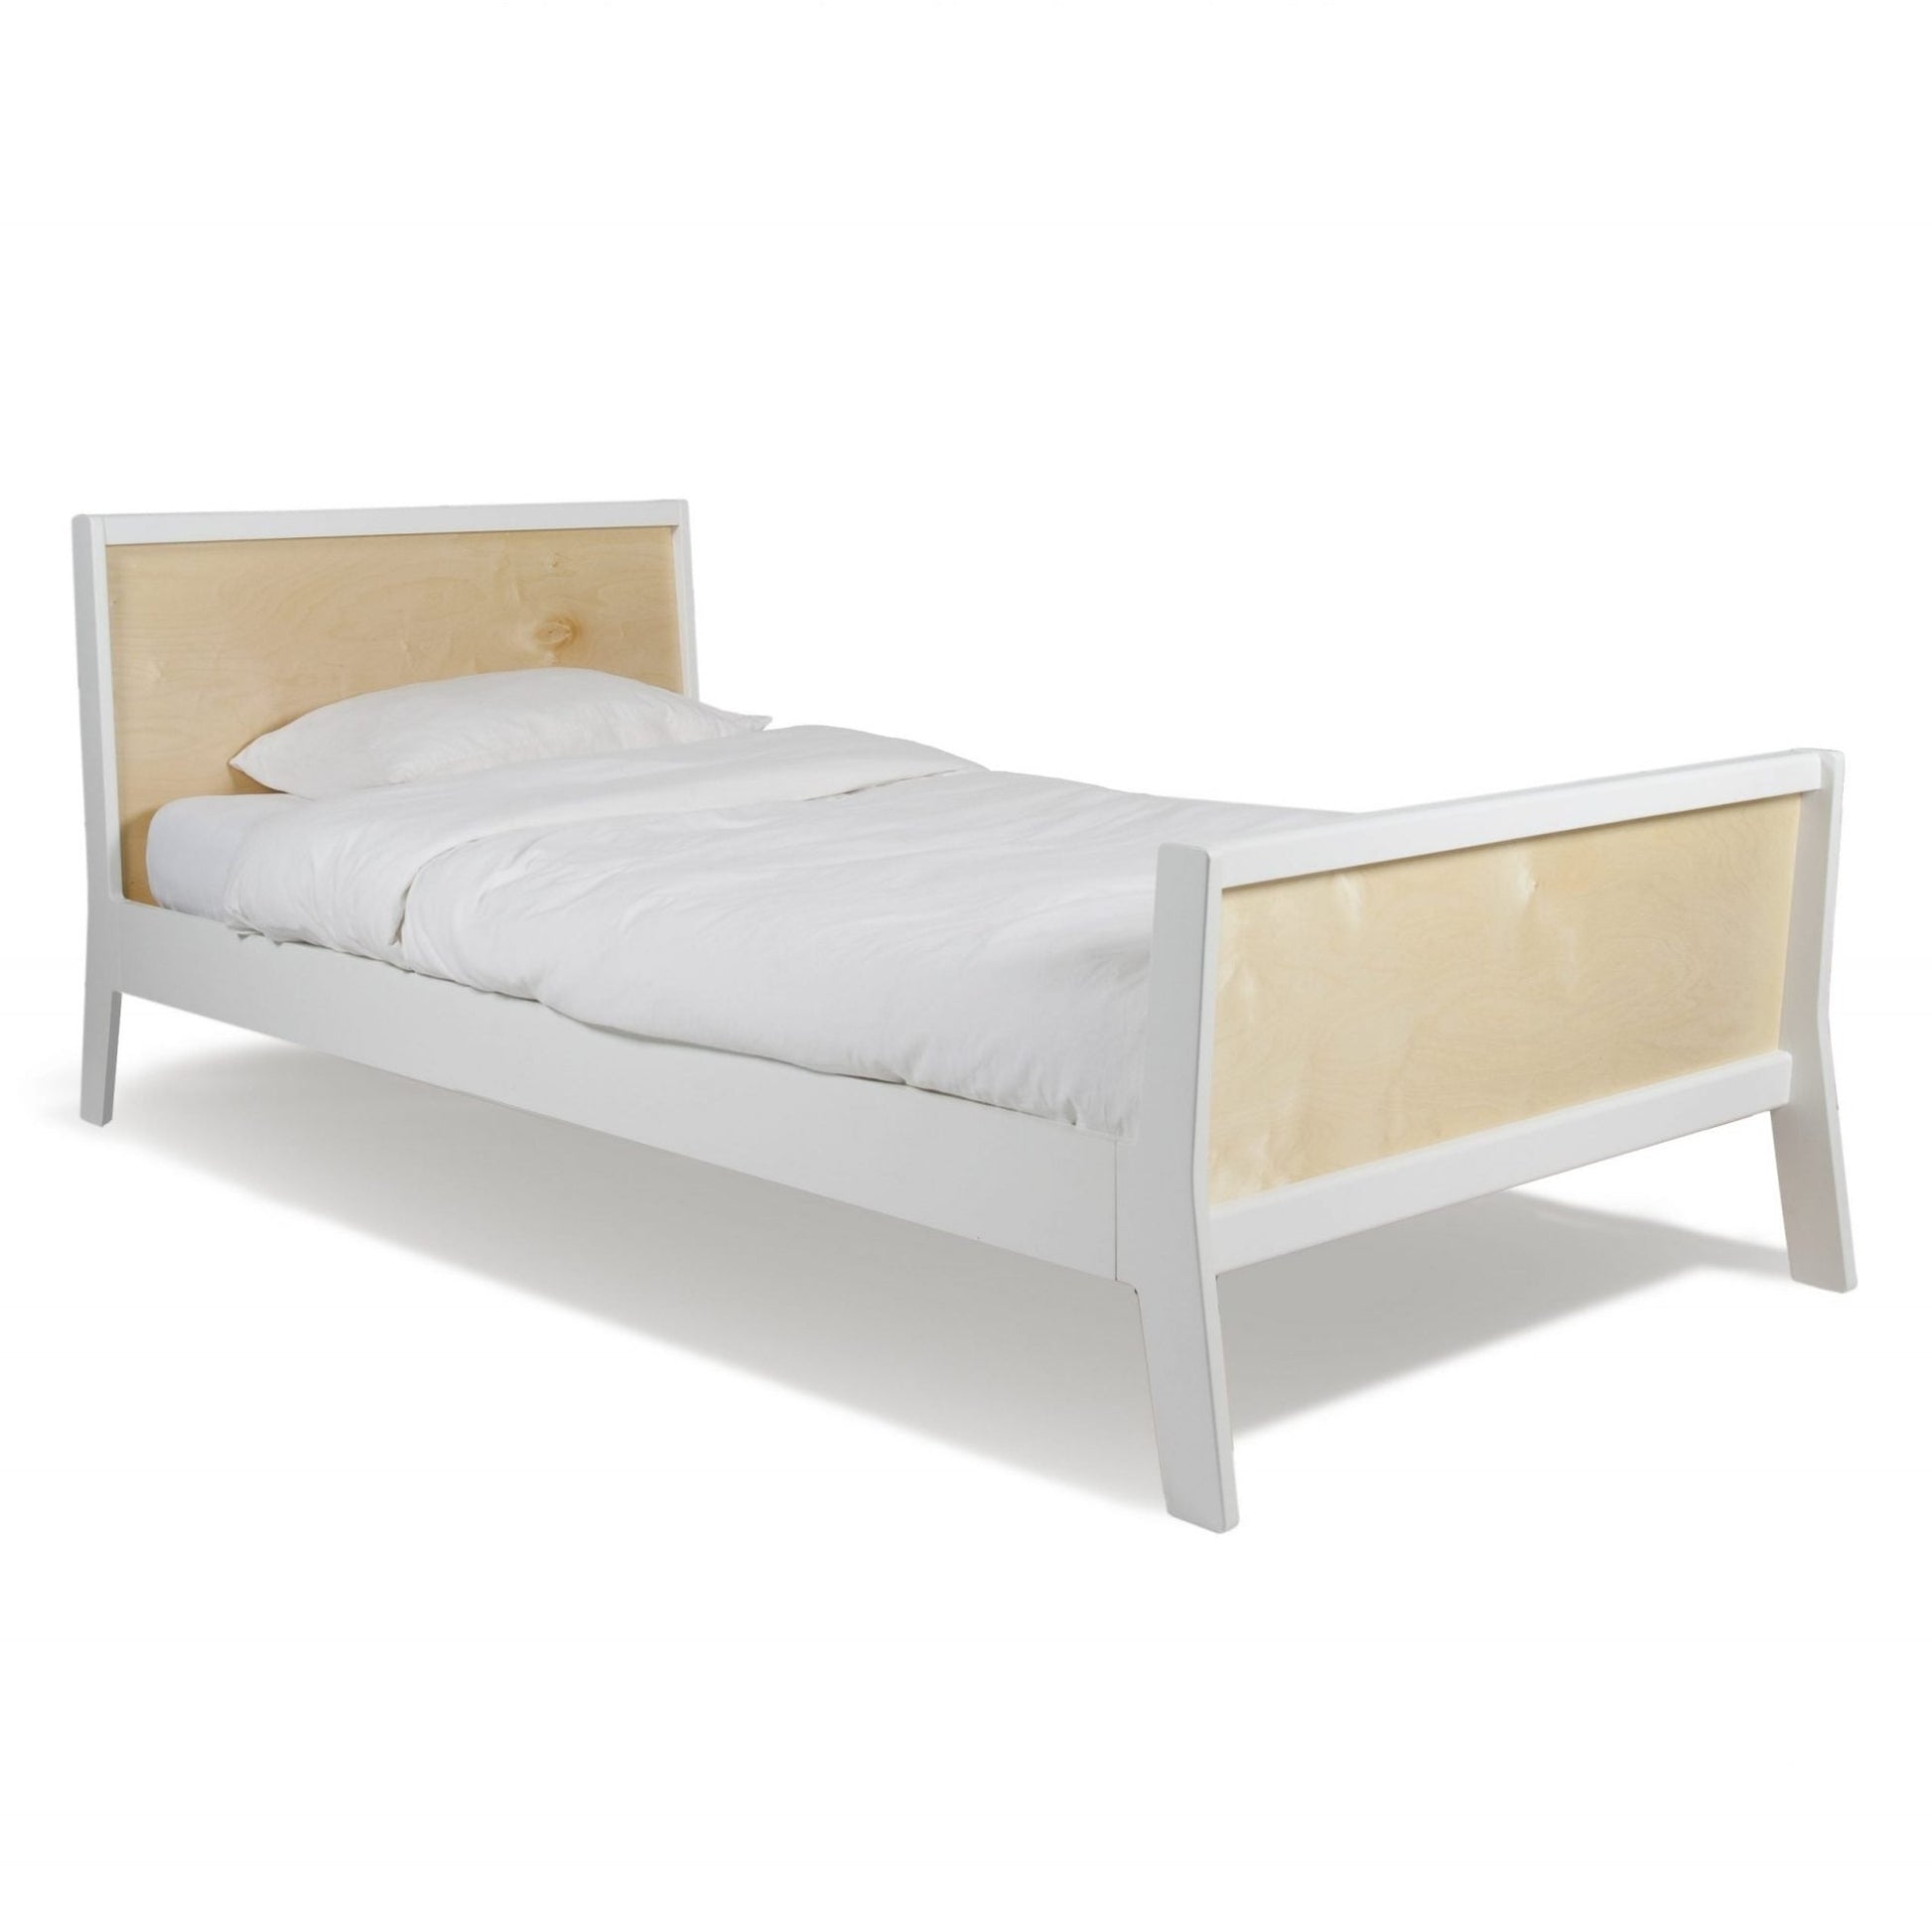 Oeuf NYC Sparrow Twin Bed - White & Birch